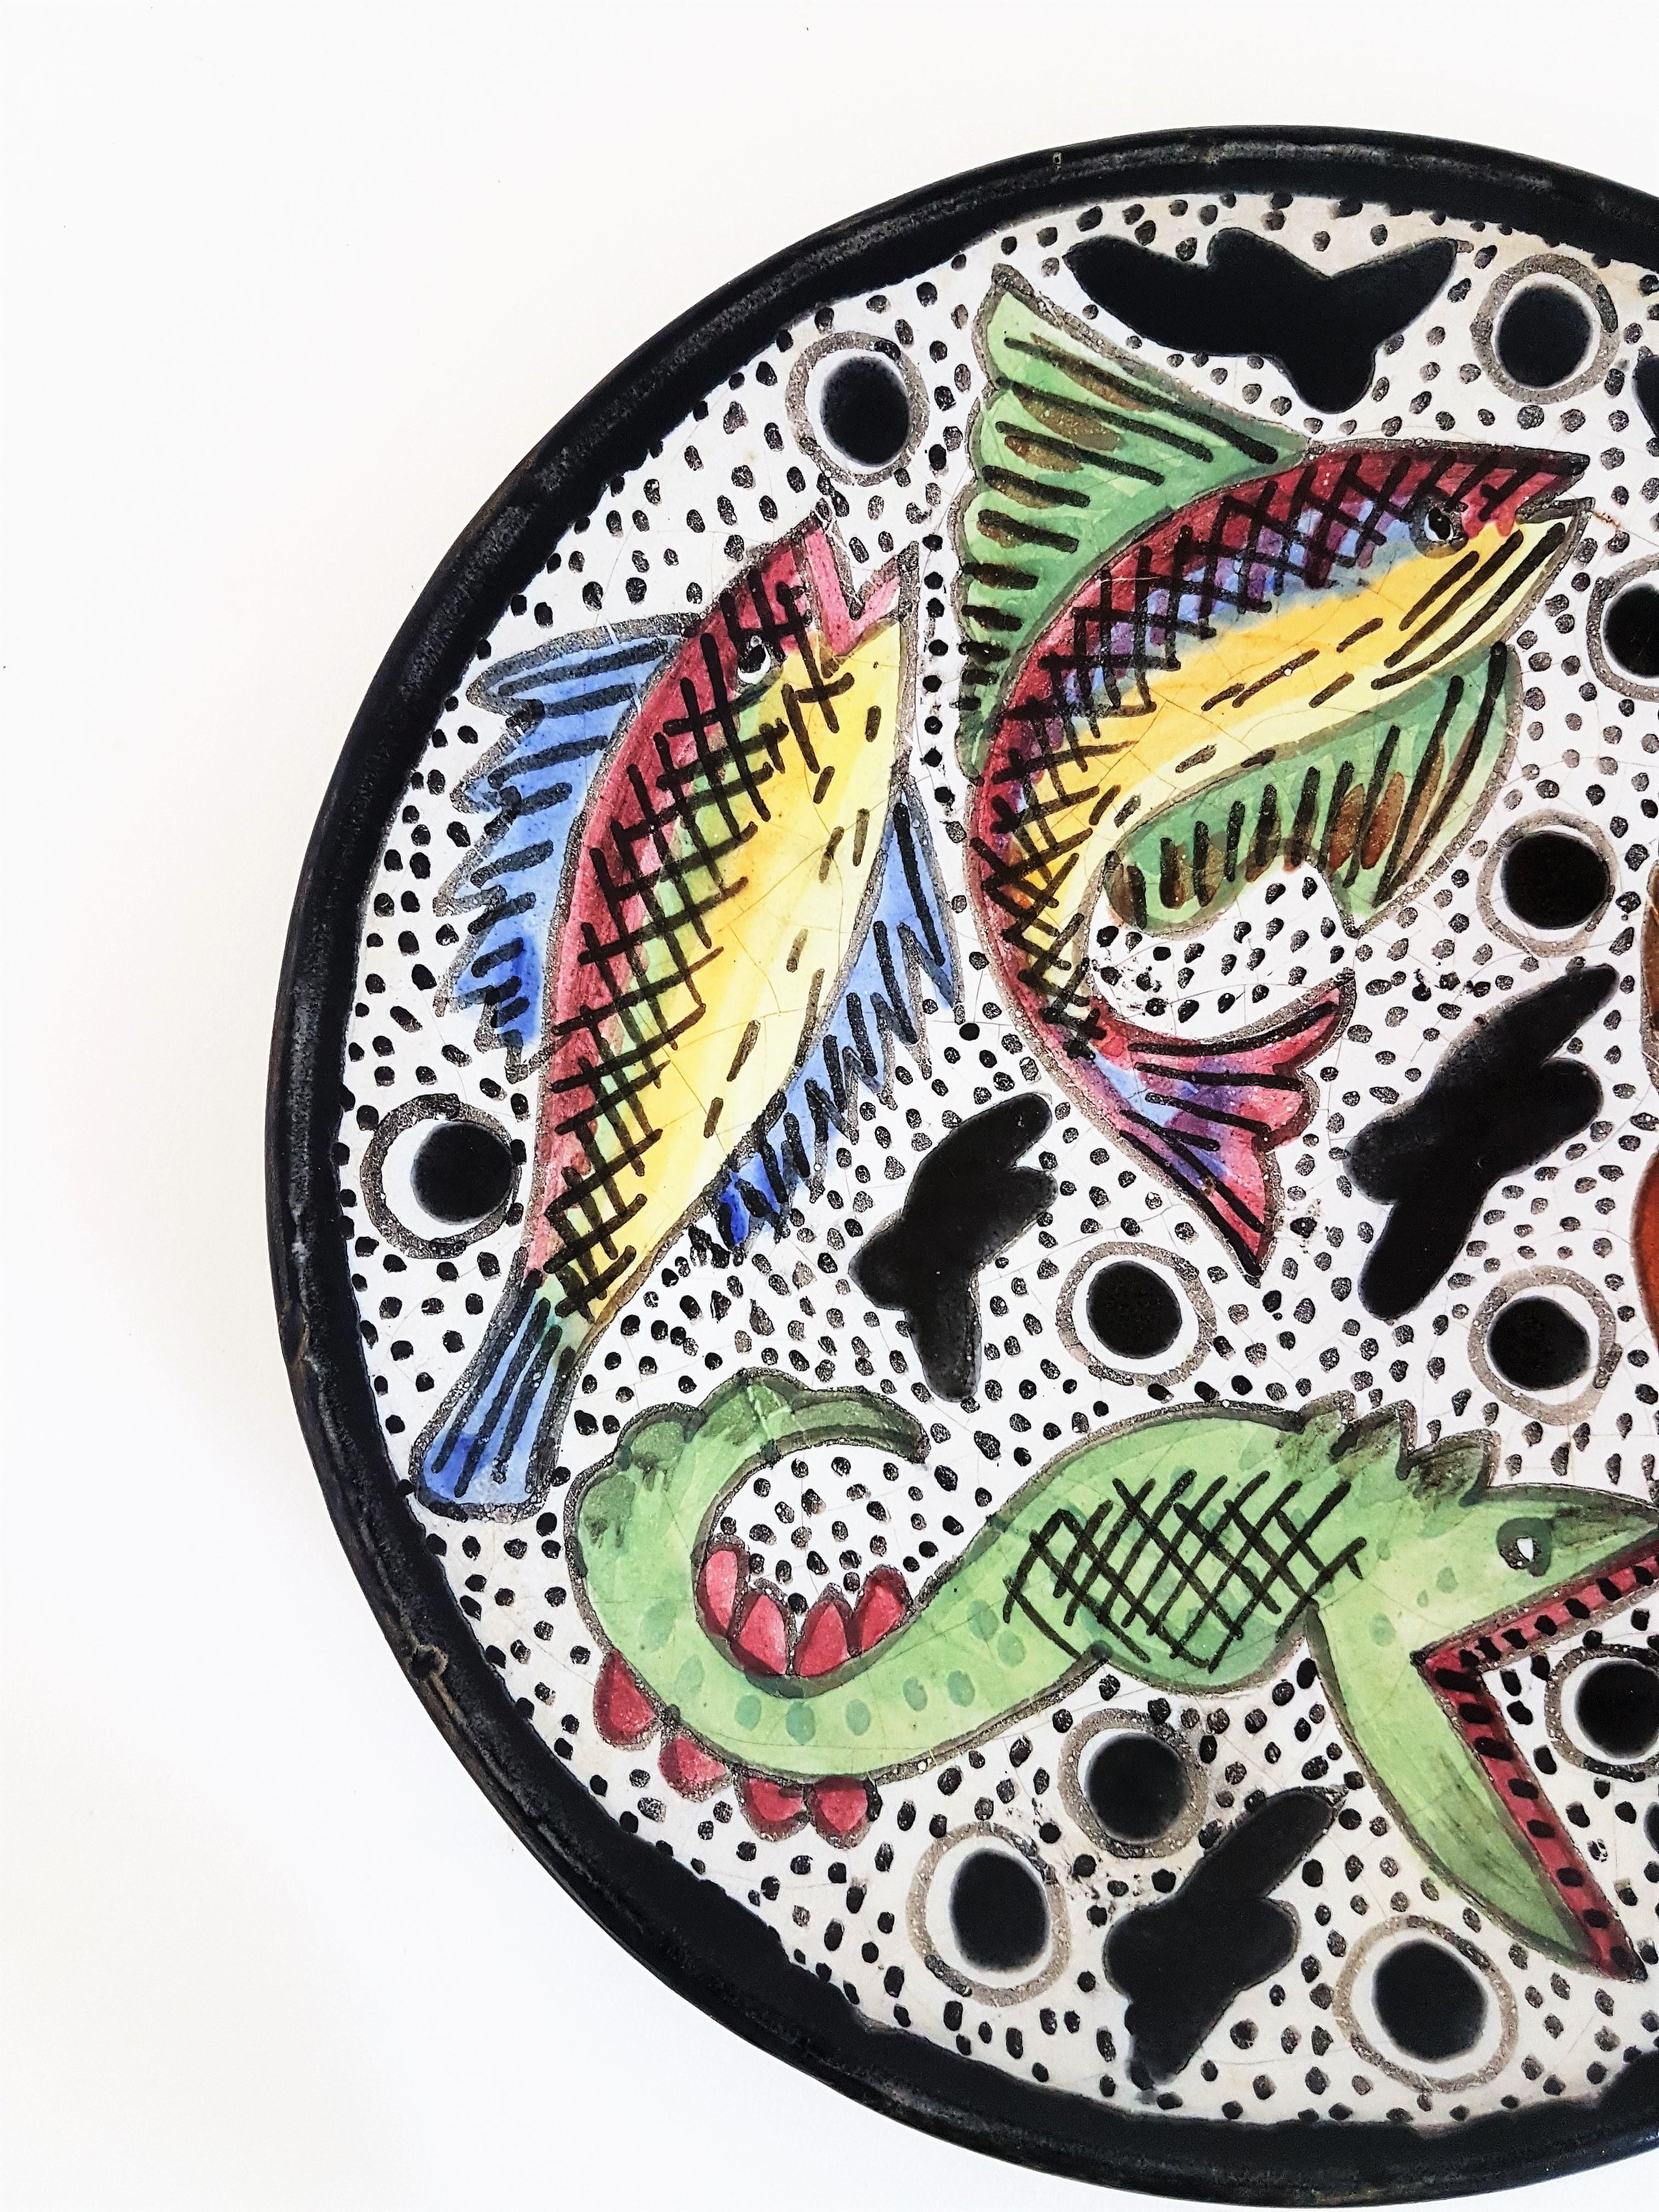 Hand painted Naif fish design terracotta wall plate
Beautiful mid-20th century terracotta plate with hand painted naif fish decoration. 
Signed Solé. 
Catalan school, Spain 1950s.
A lovely plate to use as wall decoration or centerpiece.